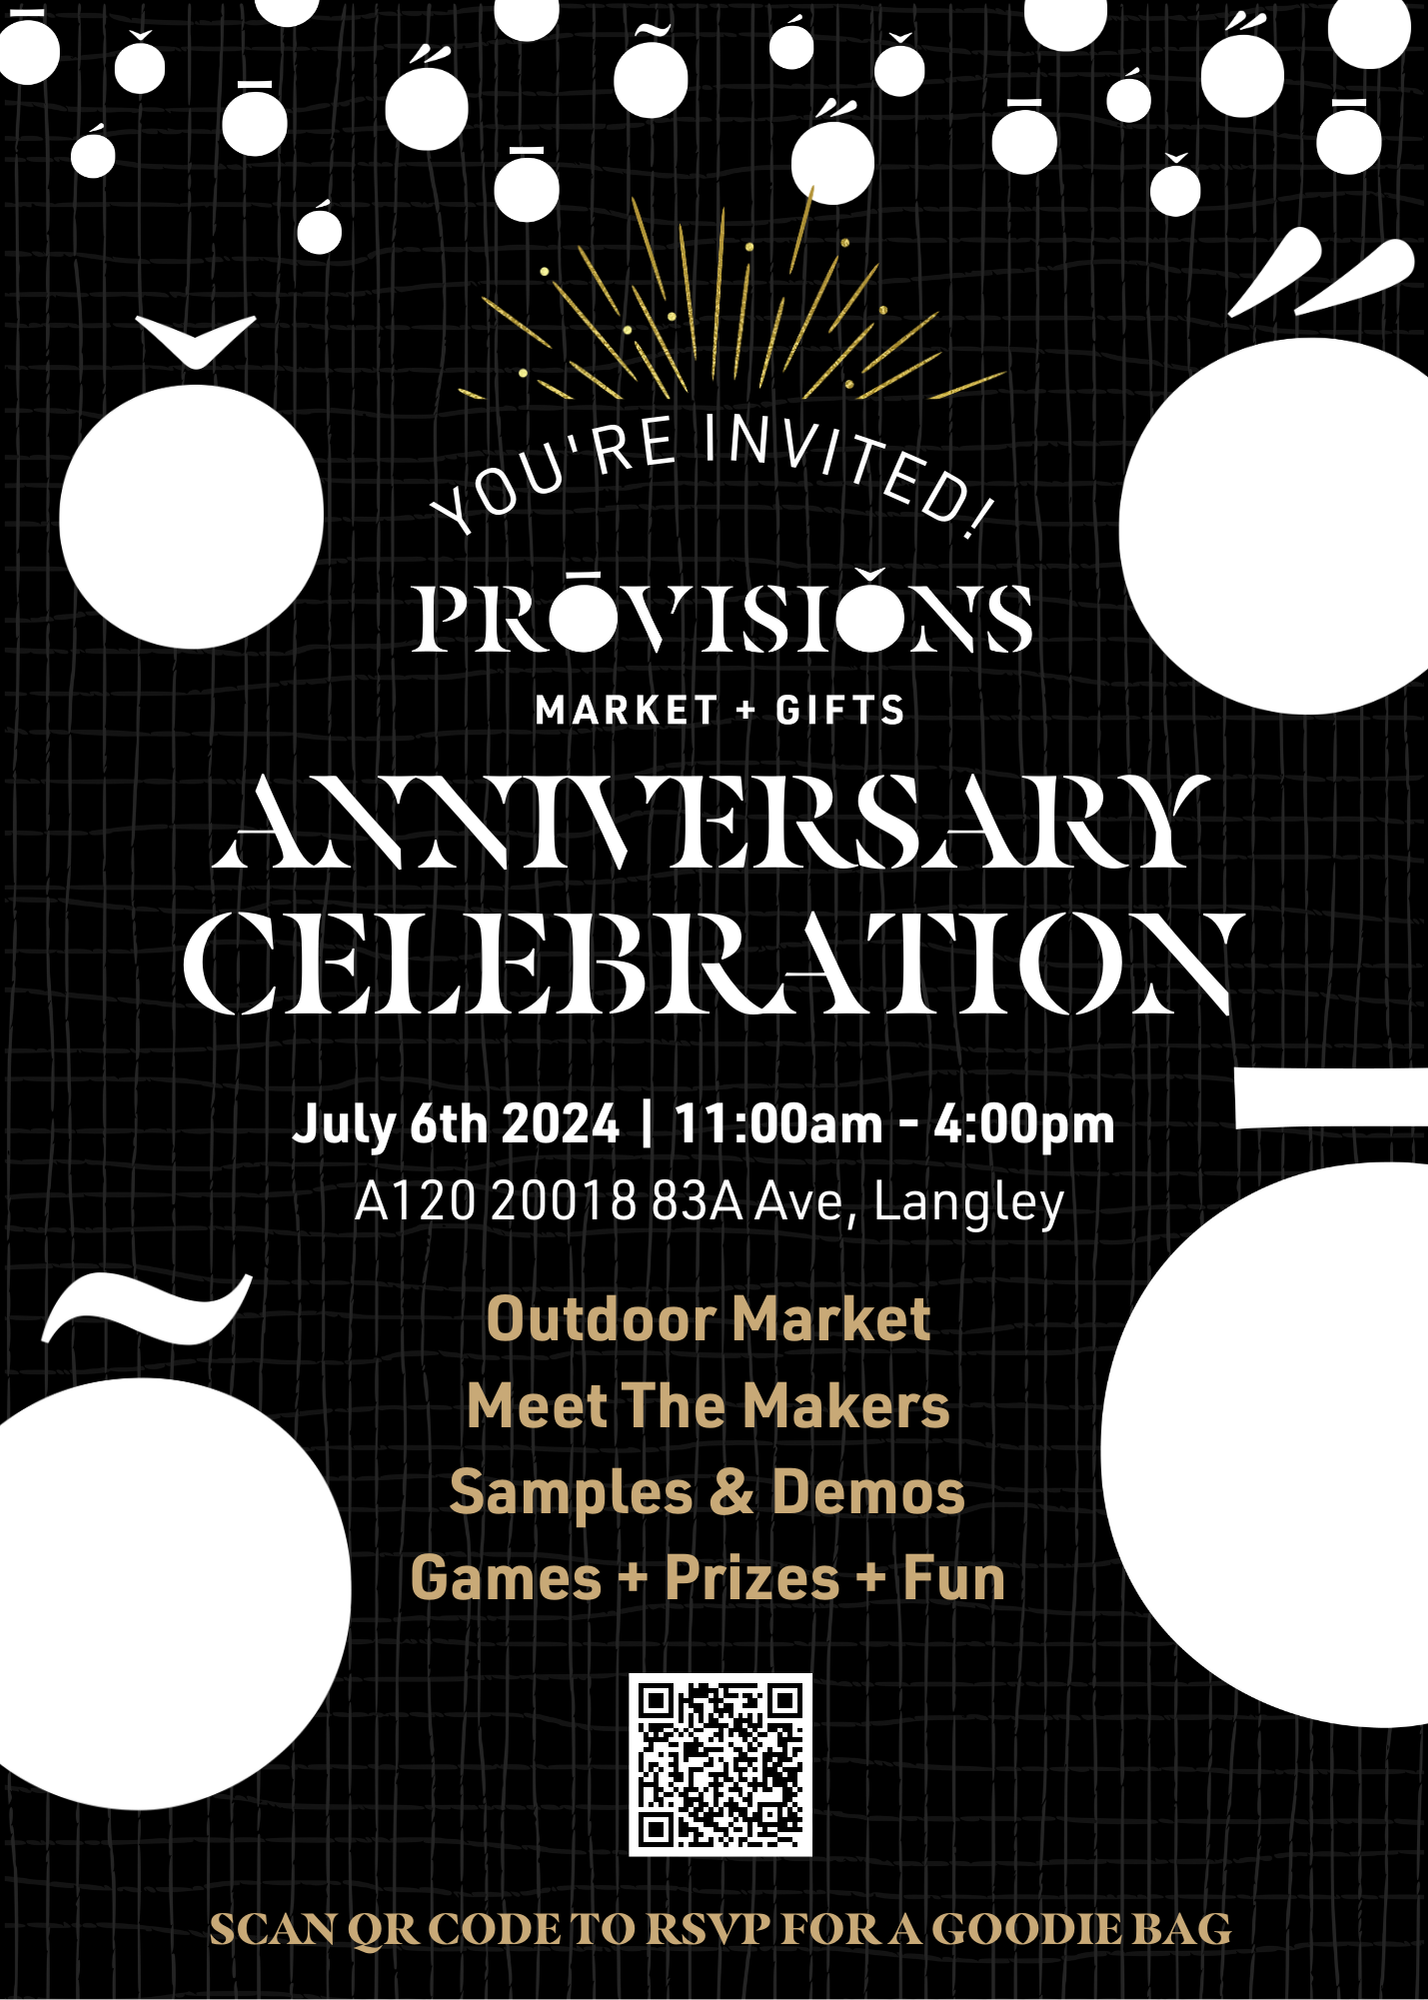 Image for Celebrate Provisions Market + Gifts' Anniversary on July 6th with Outdoor Market!